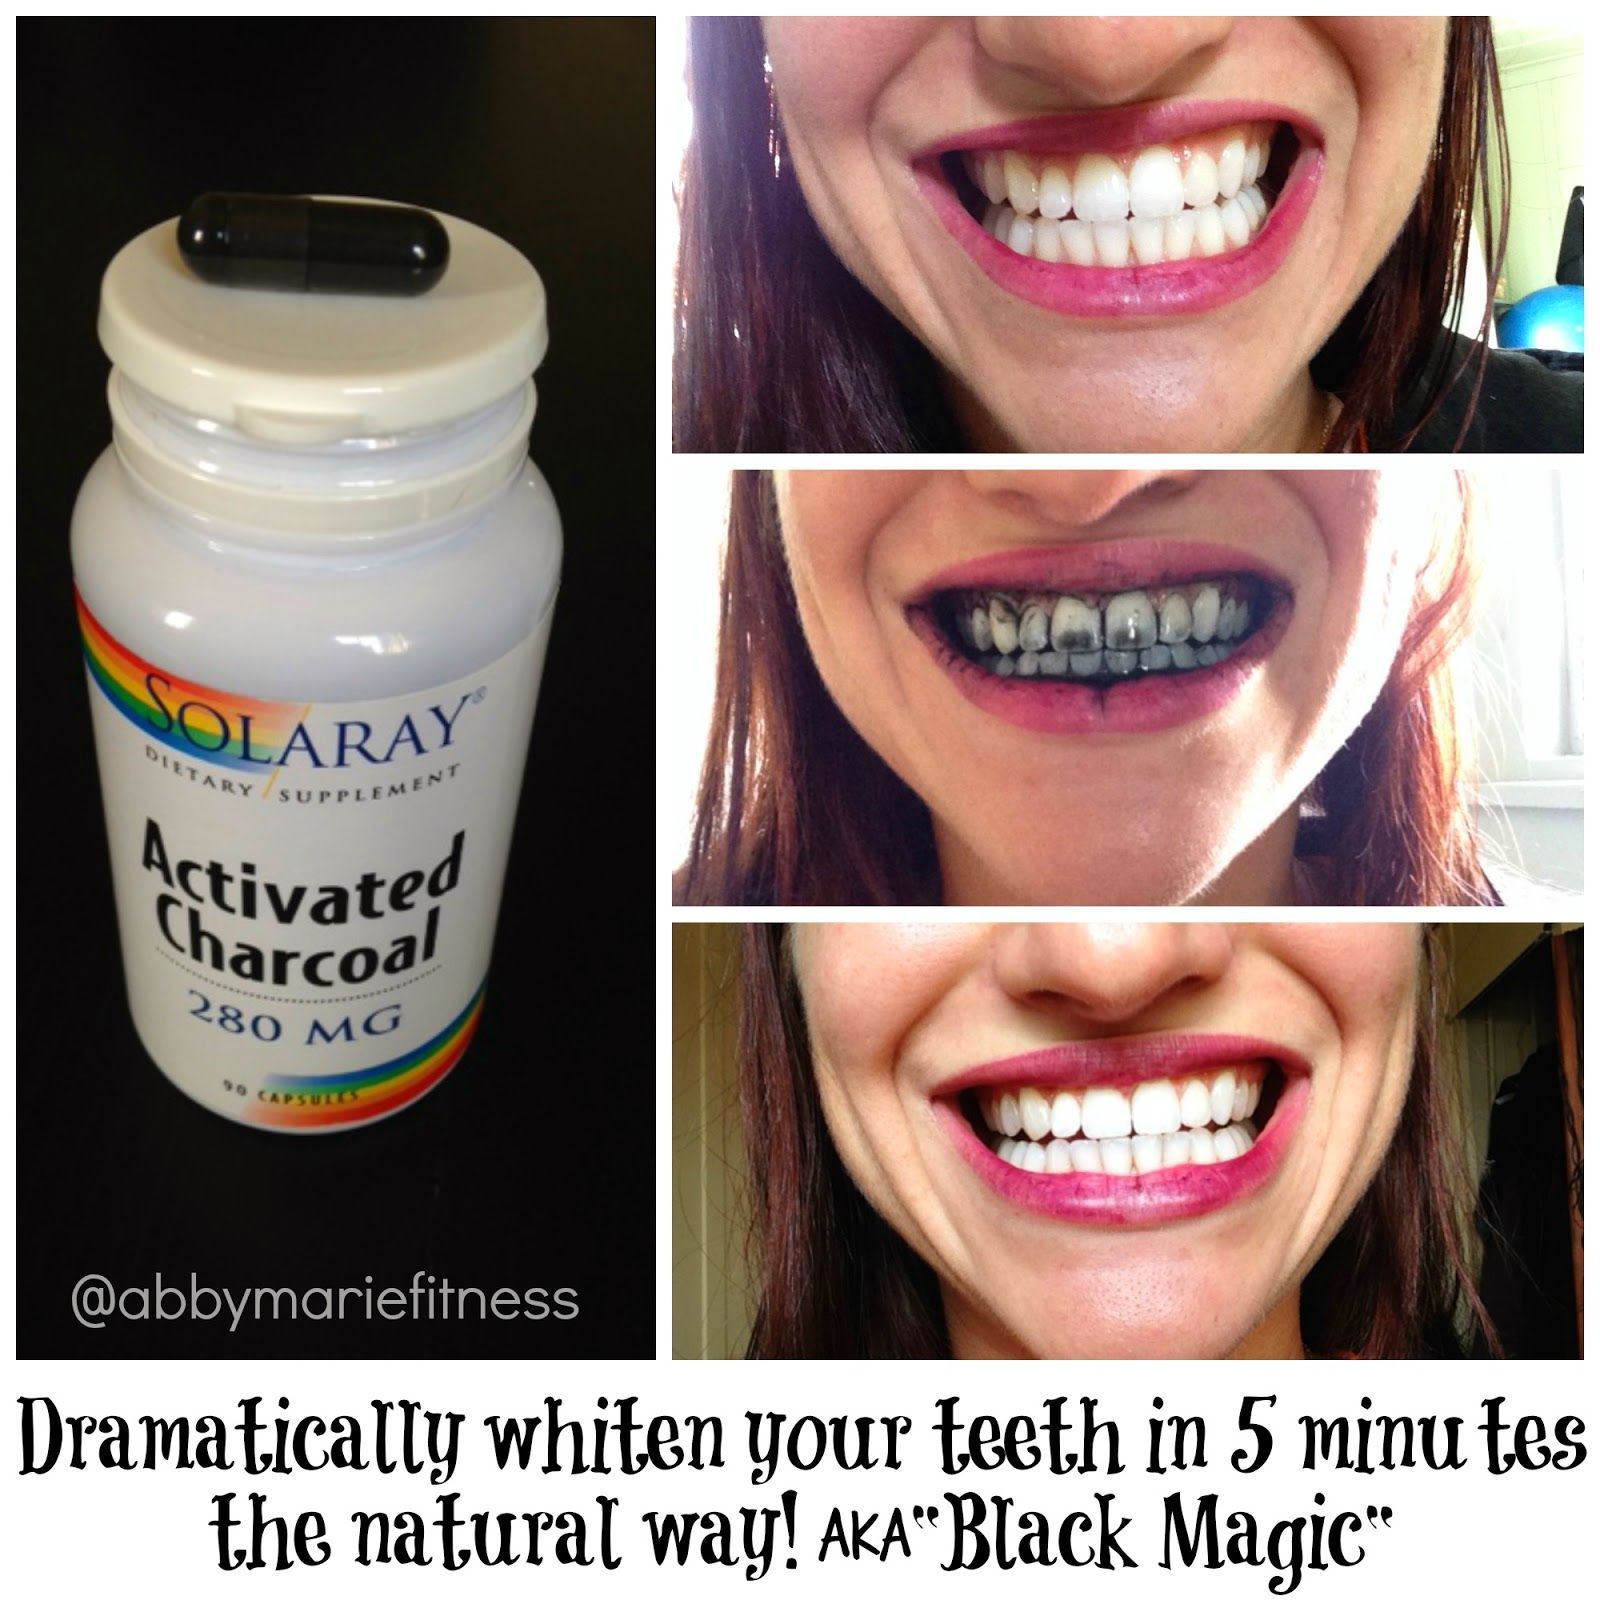 From Flab to Fab!: Whiten Y